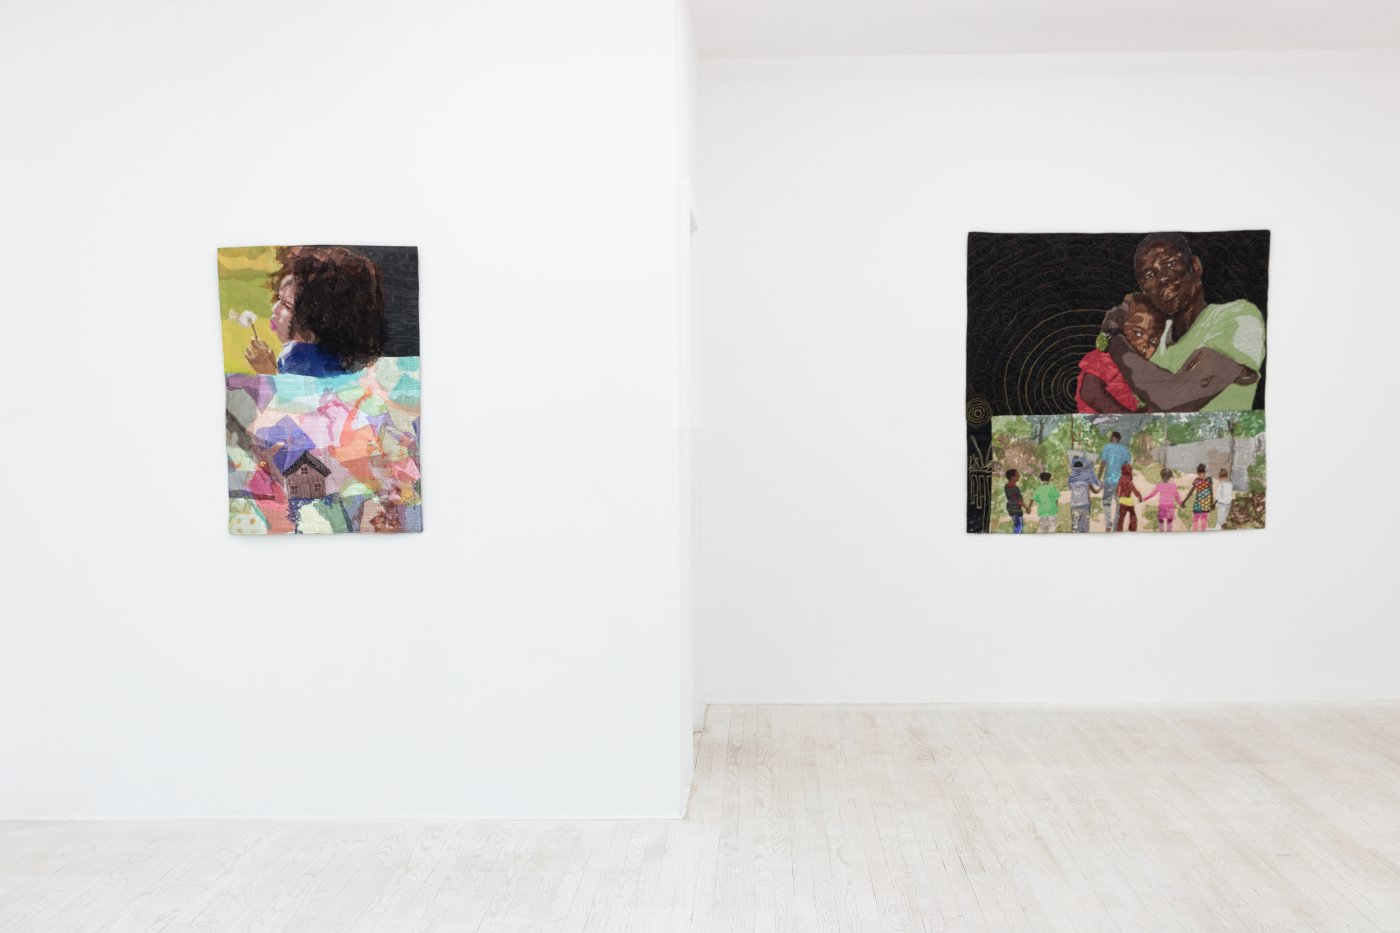 Installation image for L’Merchie Frazier - First Light: Our Stories, at Halsey McKay Gallery